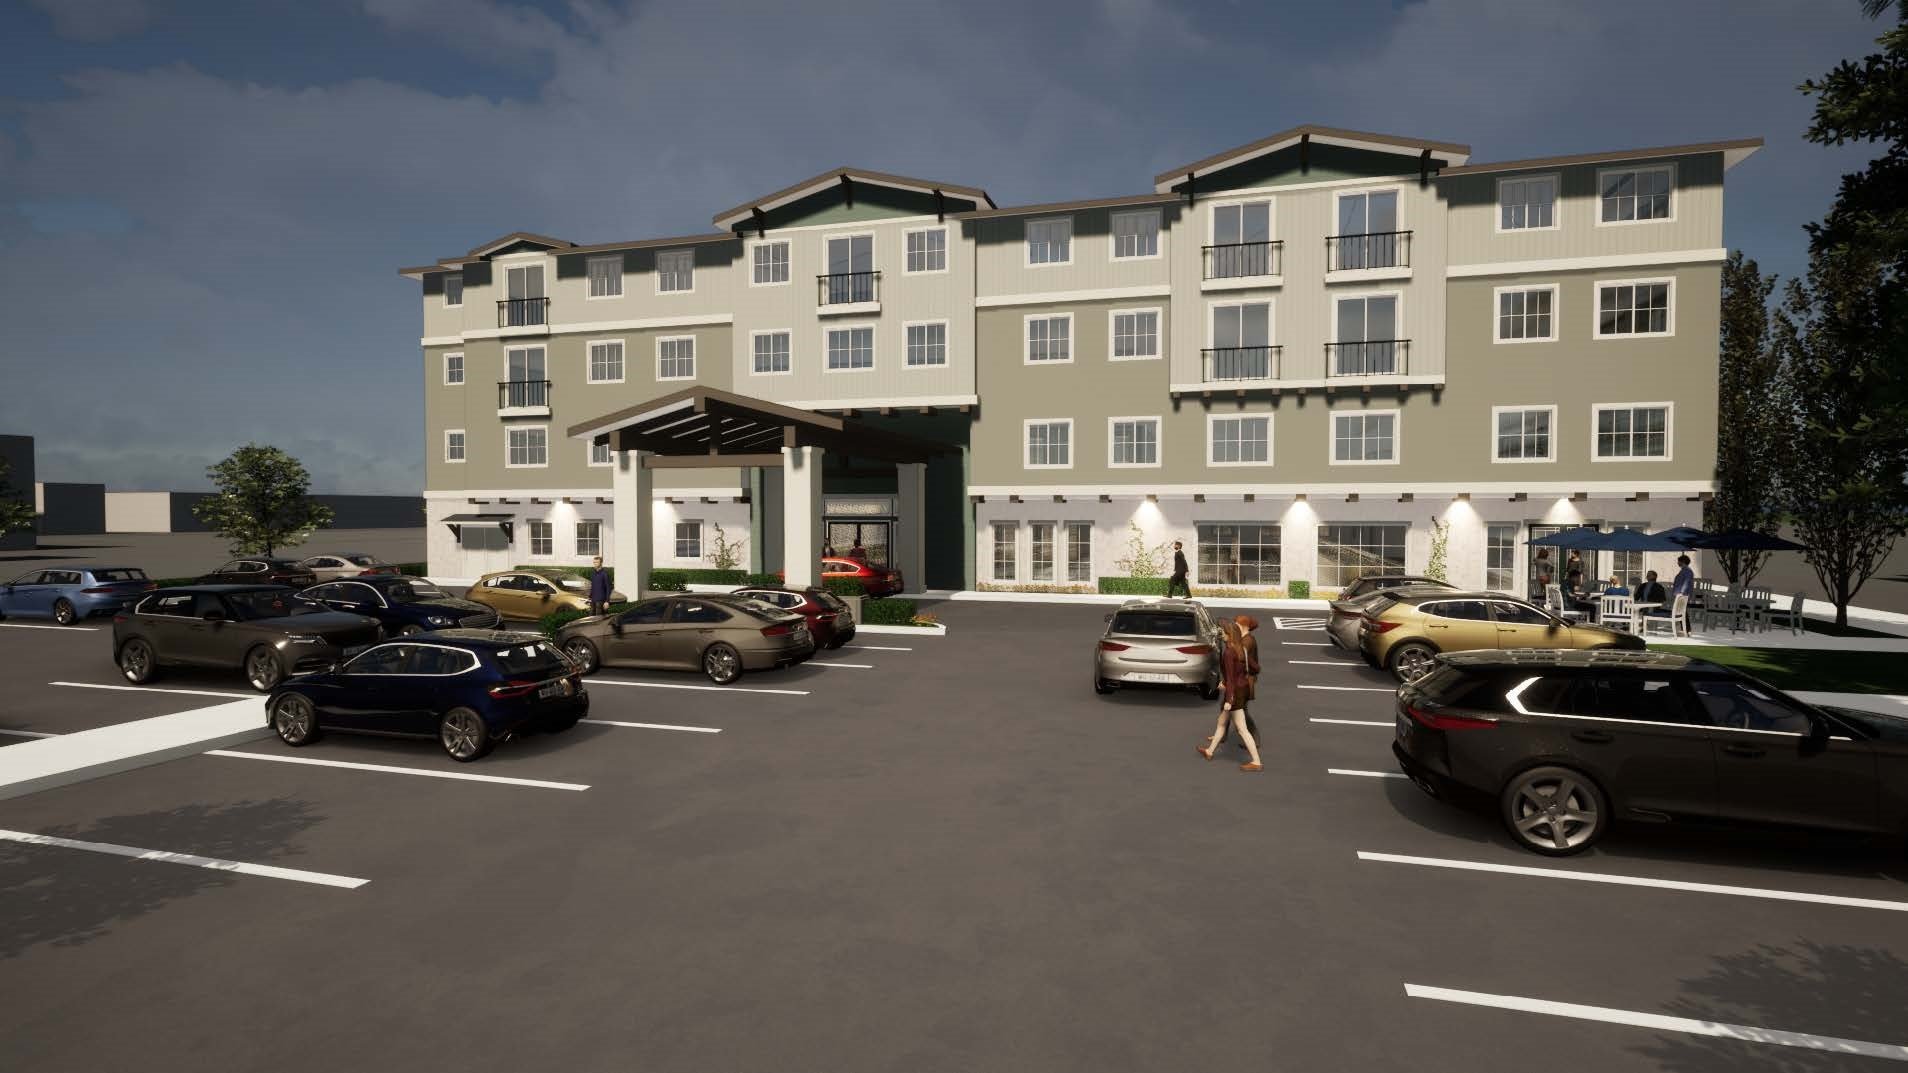 Rending of a proposed senior living complex in Capitola.